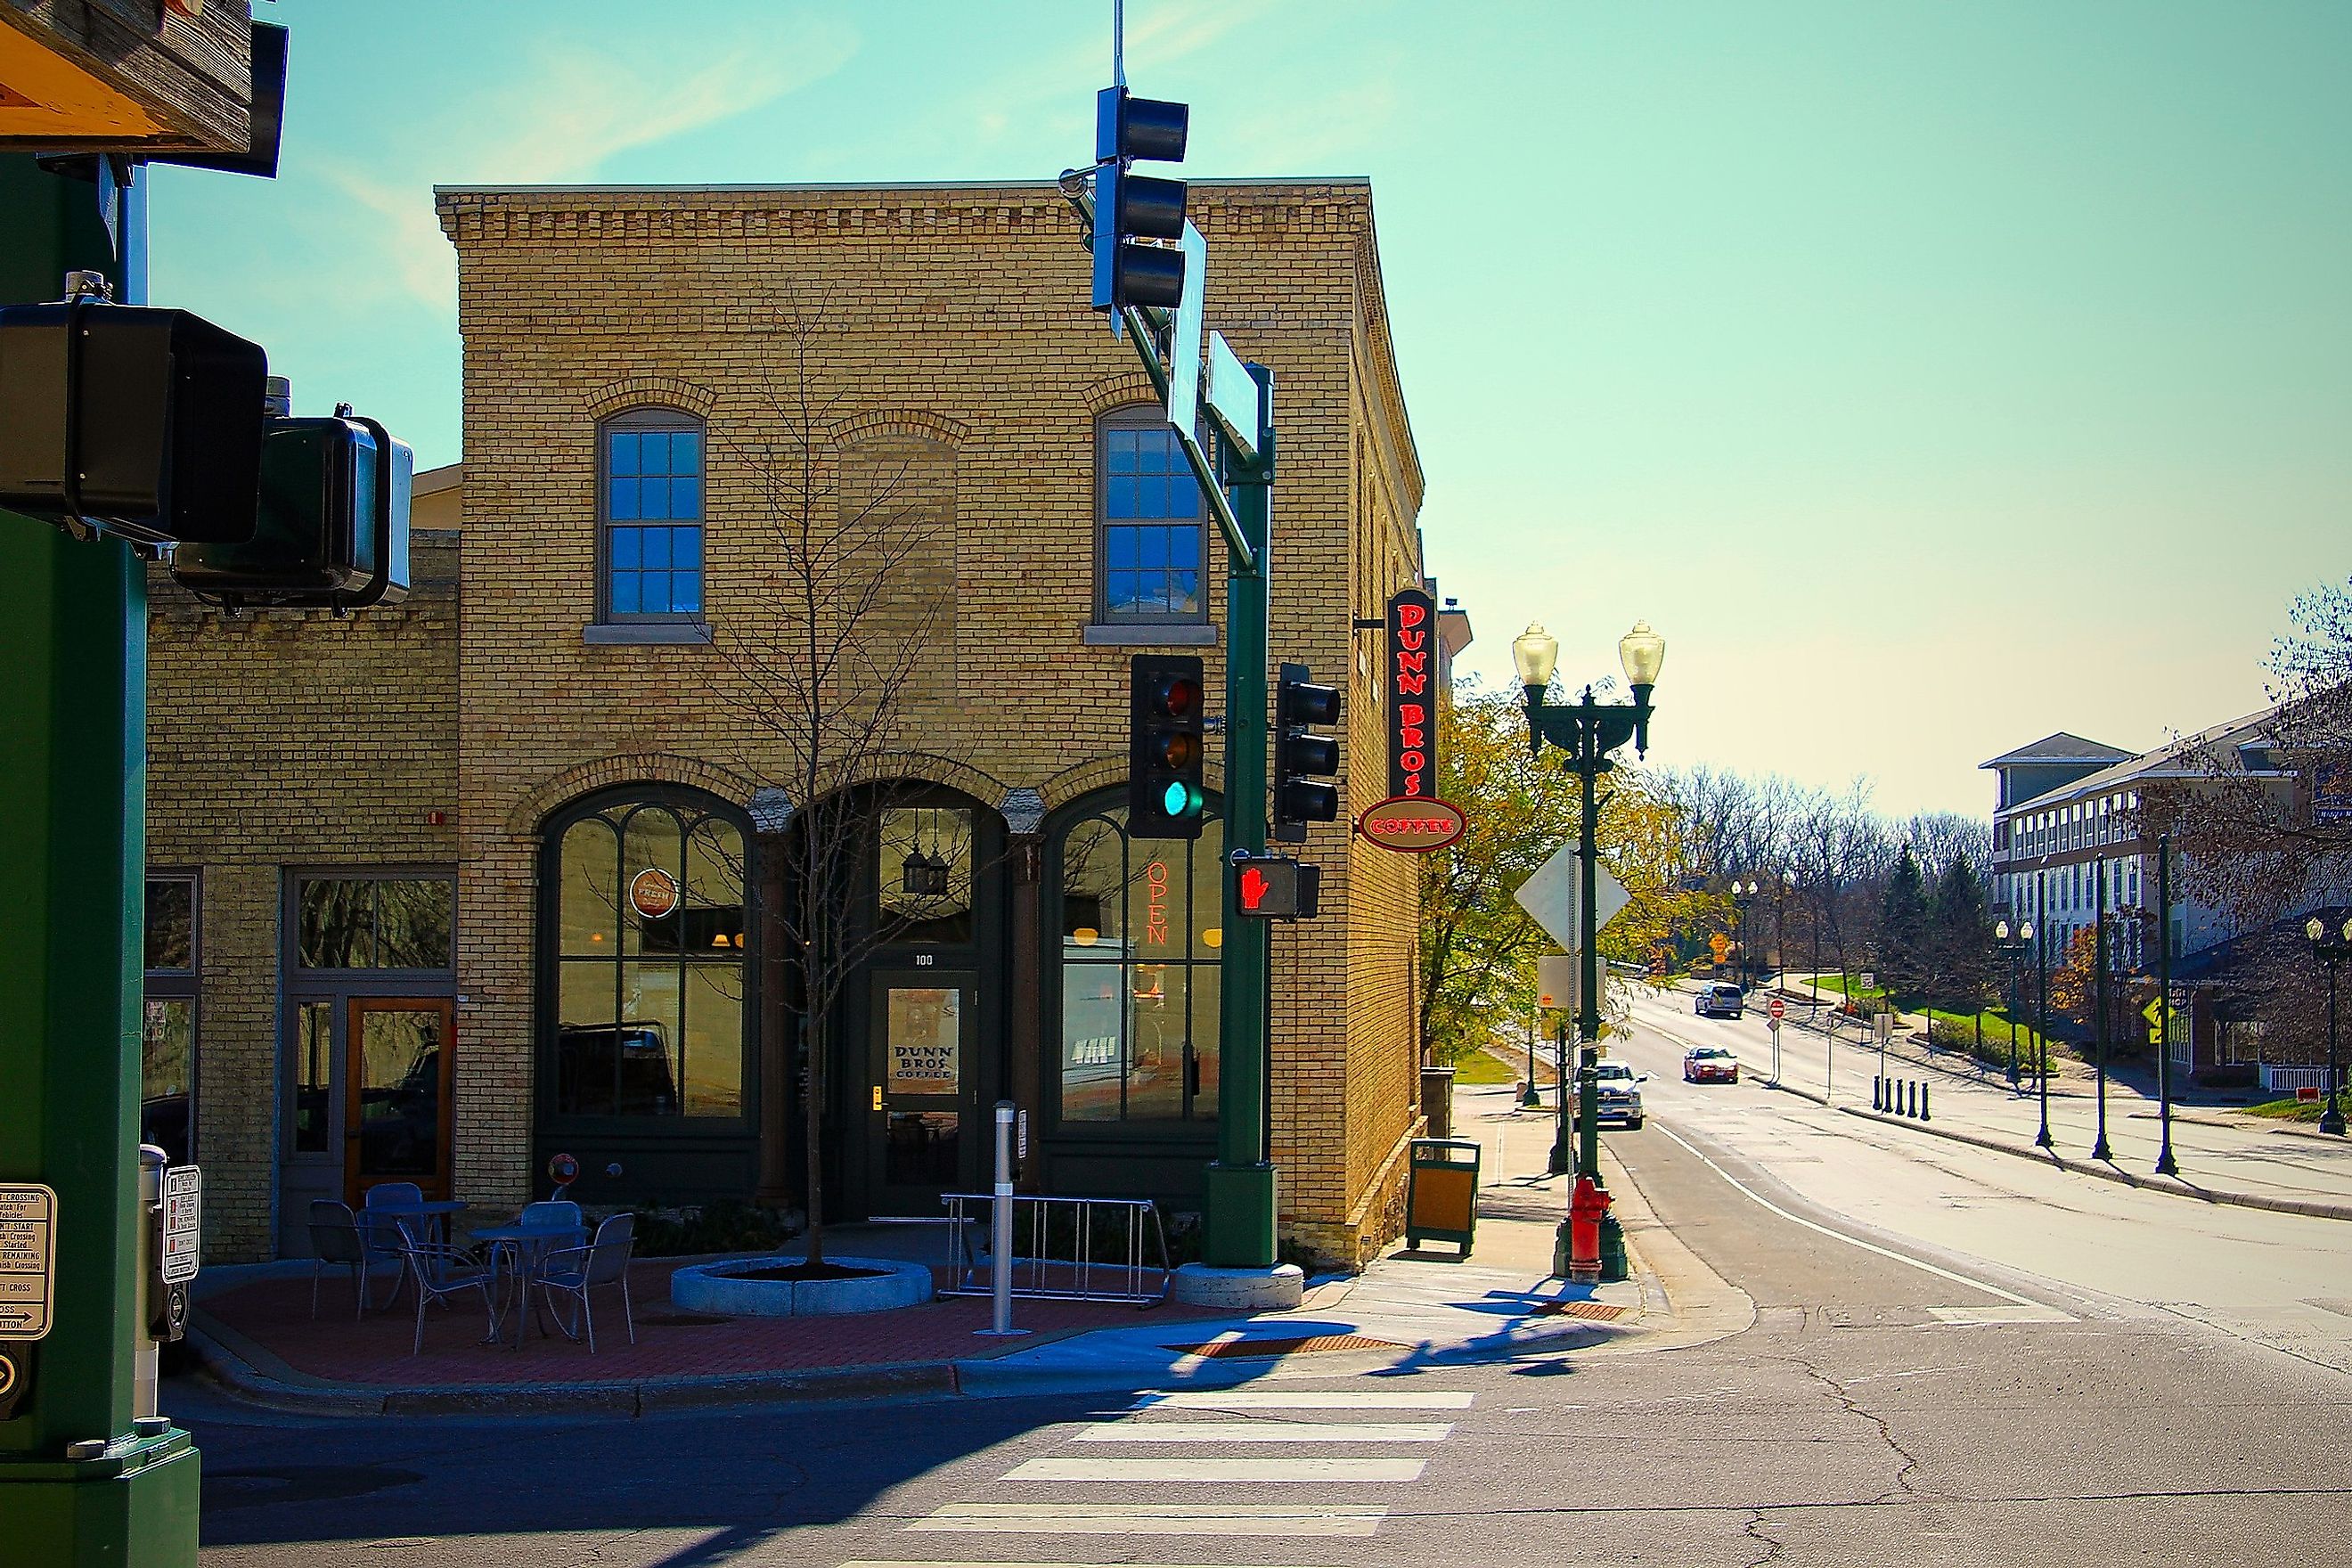 Dunn Brothers at the corner of 2nd Street and Chestnut Street in Chaska, Minnesota. Image credit Michael Hicks, CC BY 2.0 <https://creativecommons.org/licenses/by/2.0>, via Wikimedia Commons